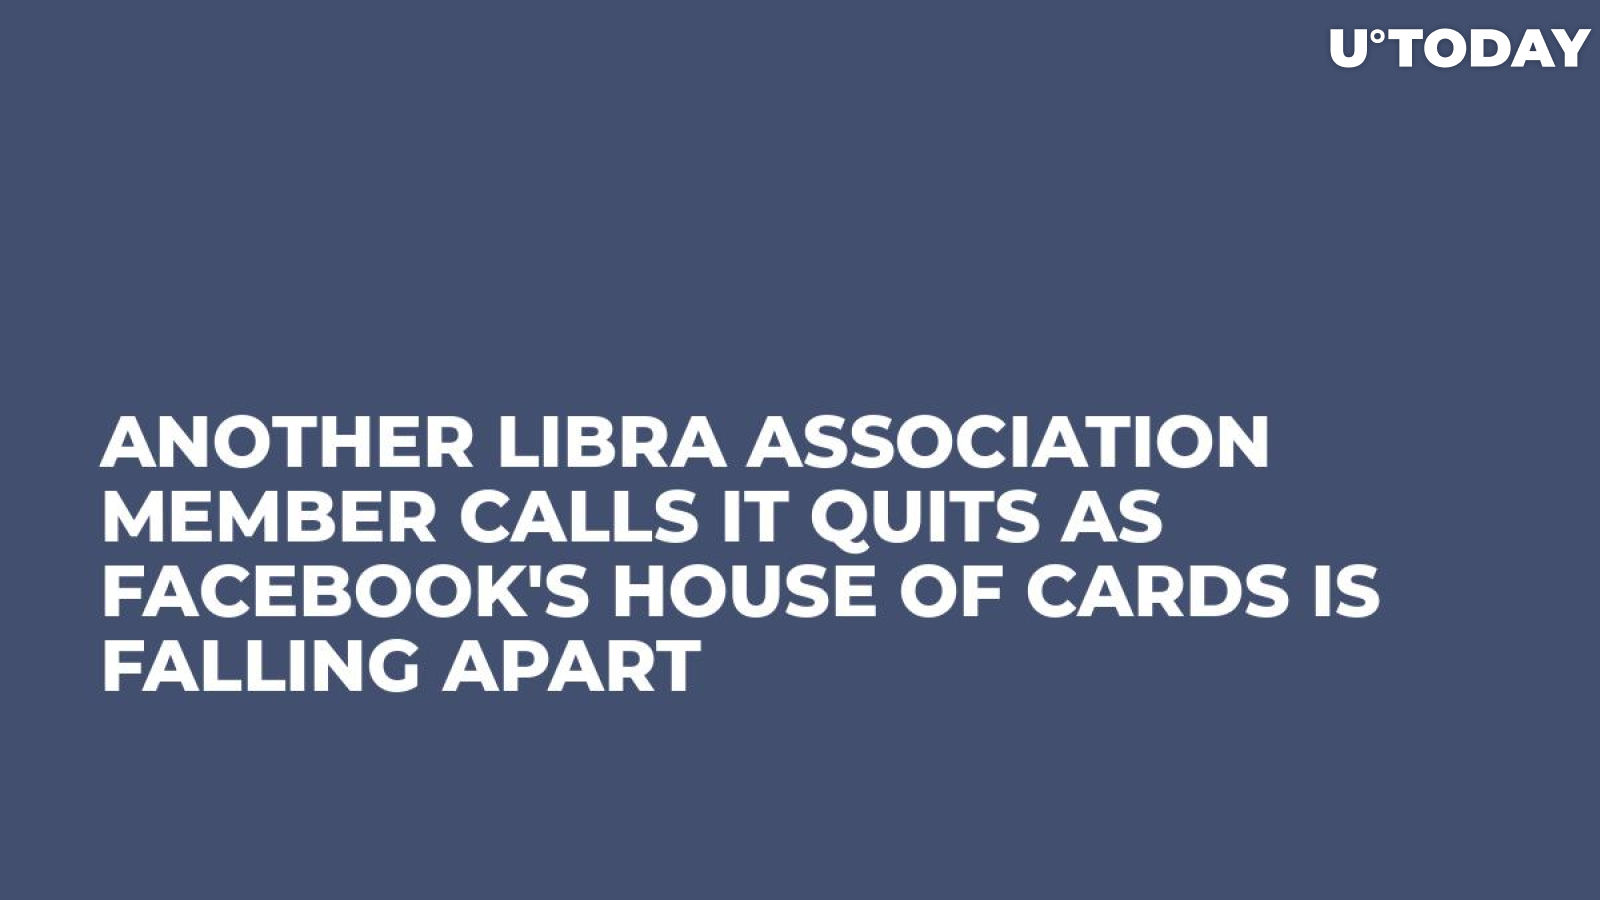 Another Libra Association Member Calls It Quits as Facebook's House of Cards Is Falling Apart